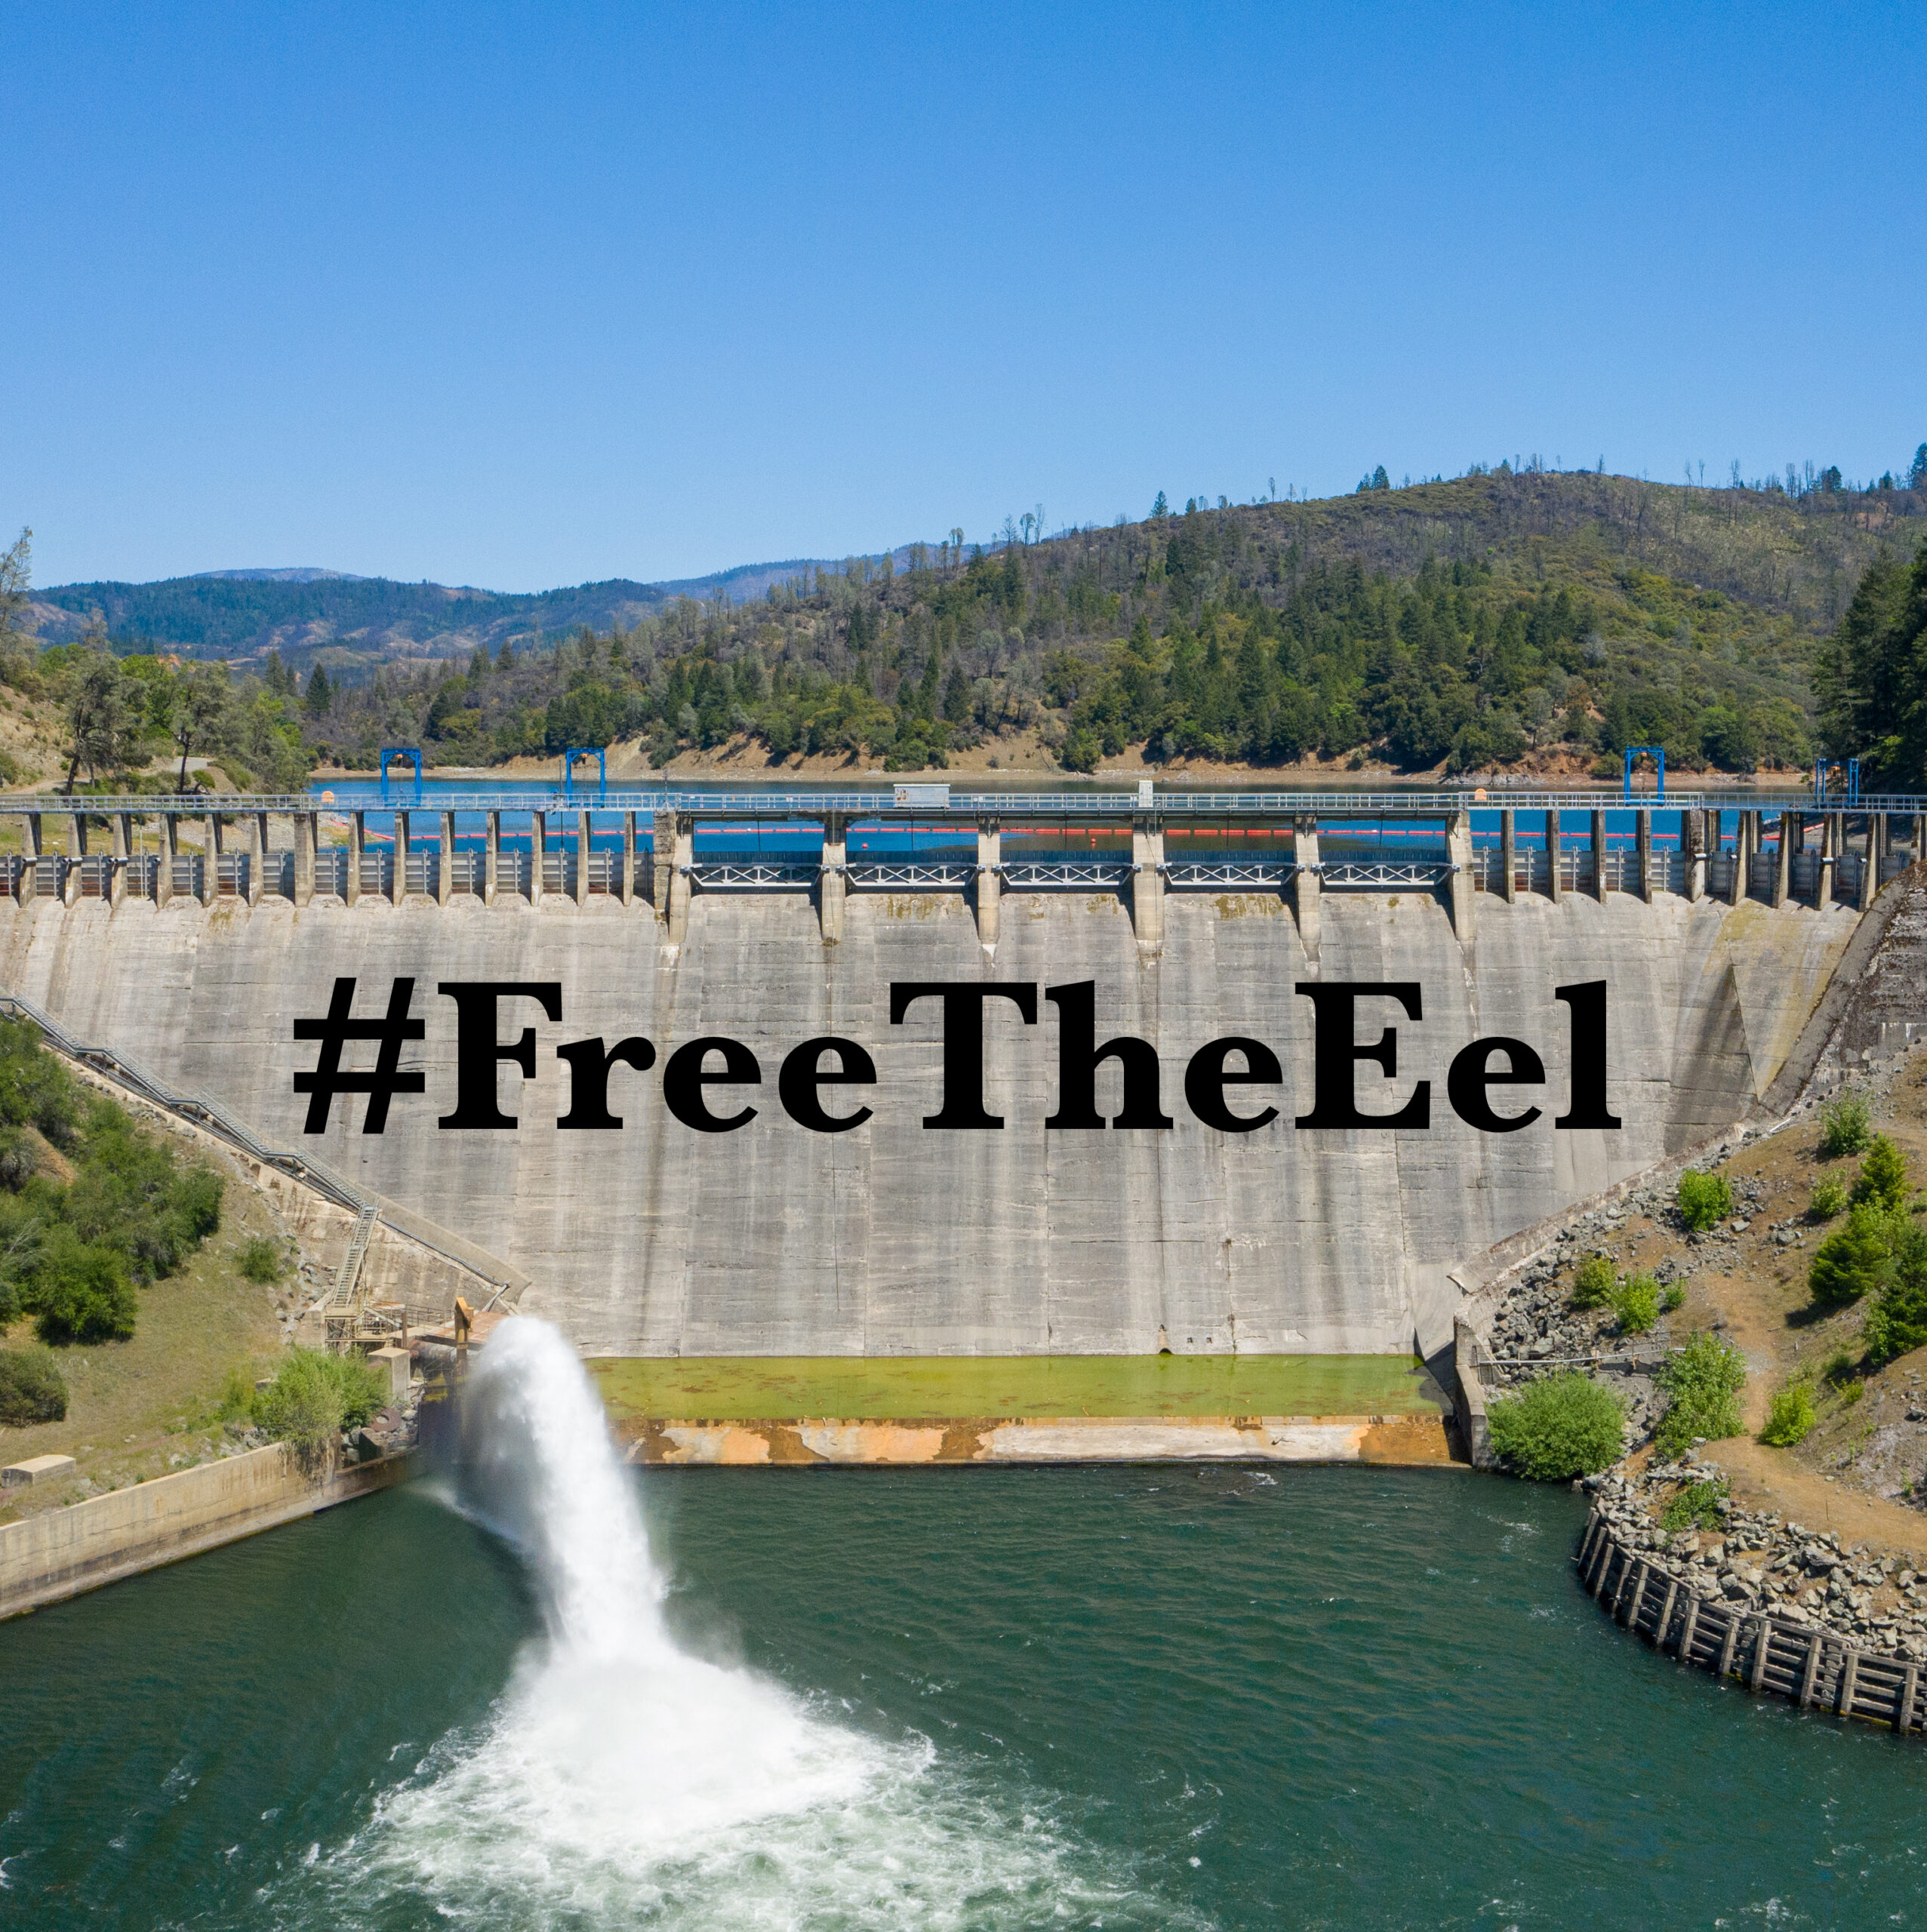 Free The Eel, Endangered Species Act, Dam Removal